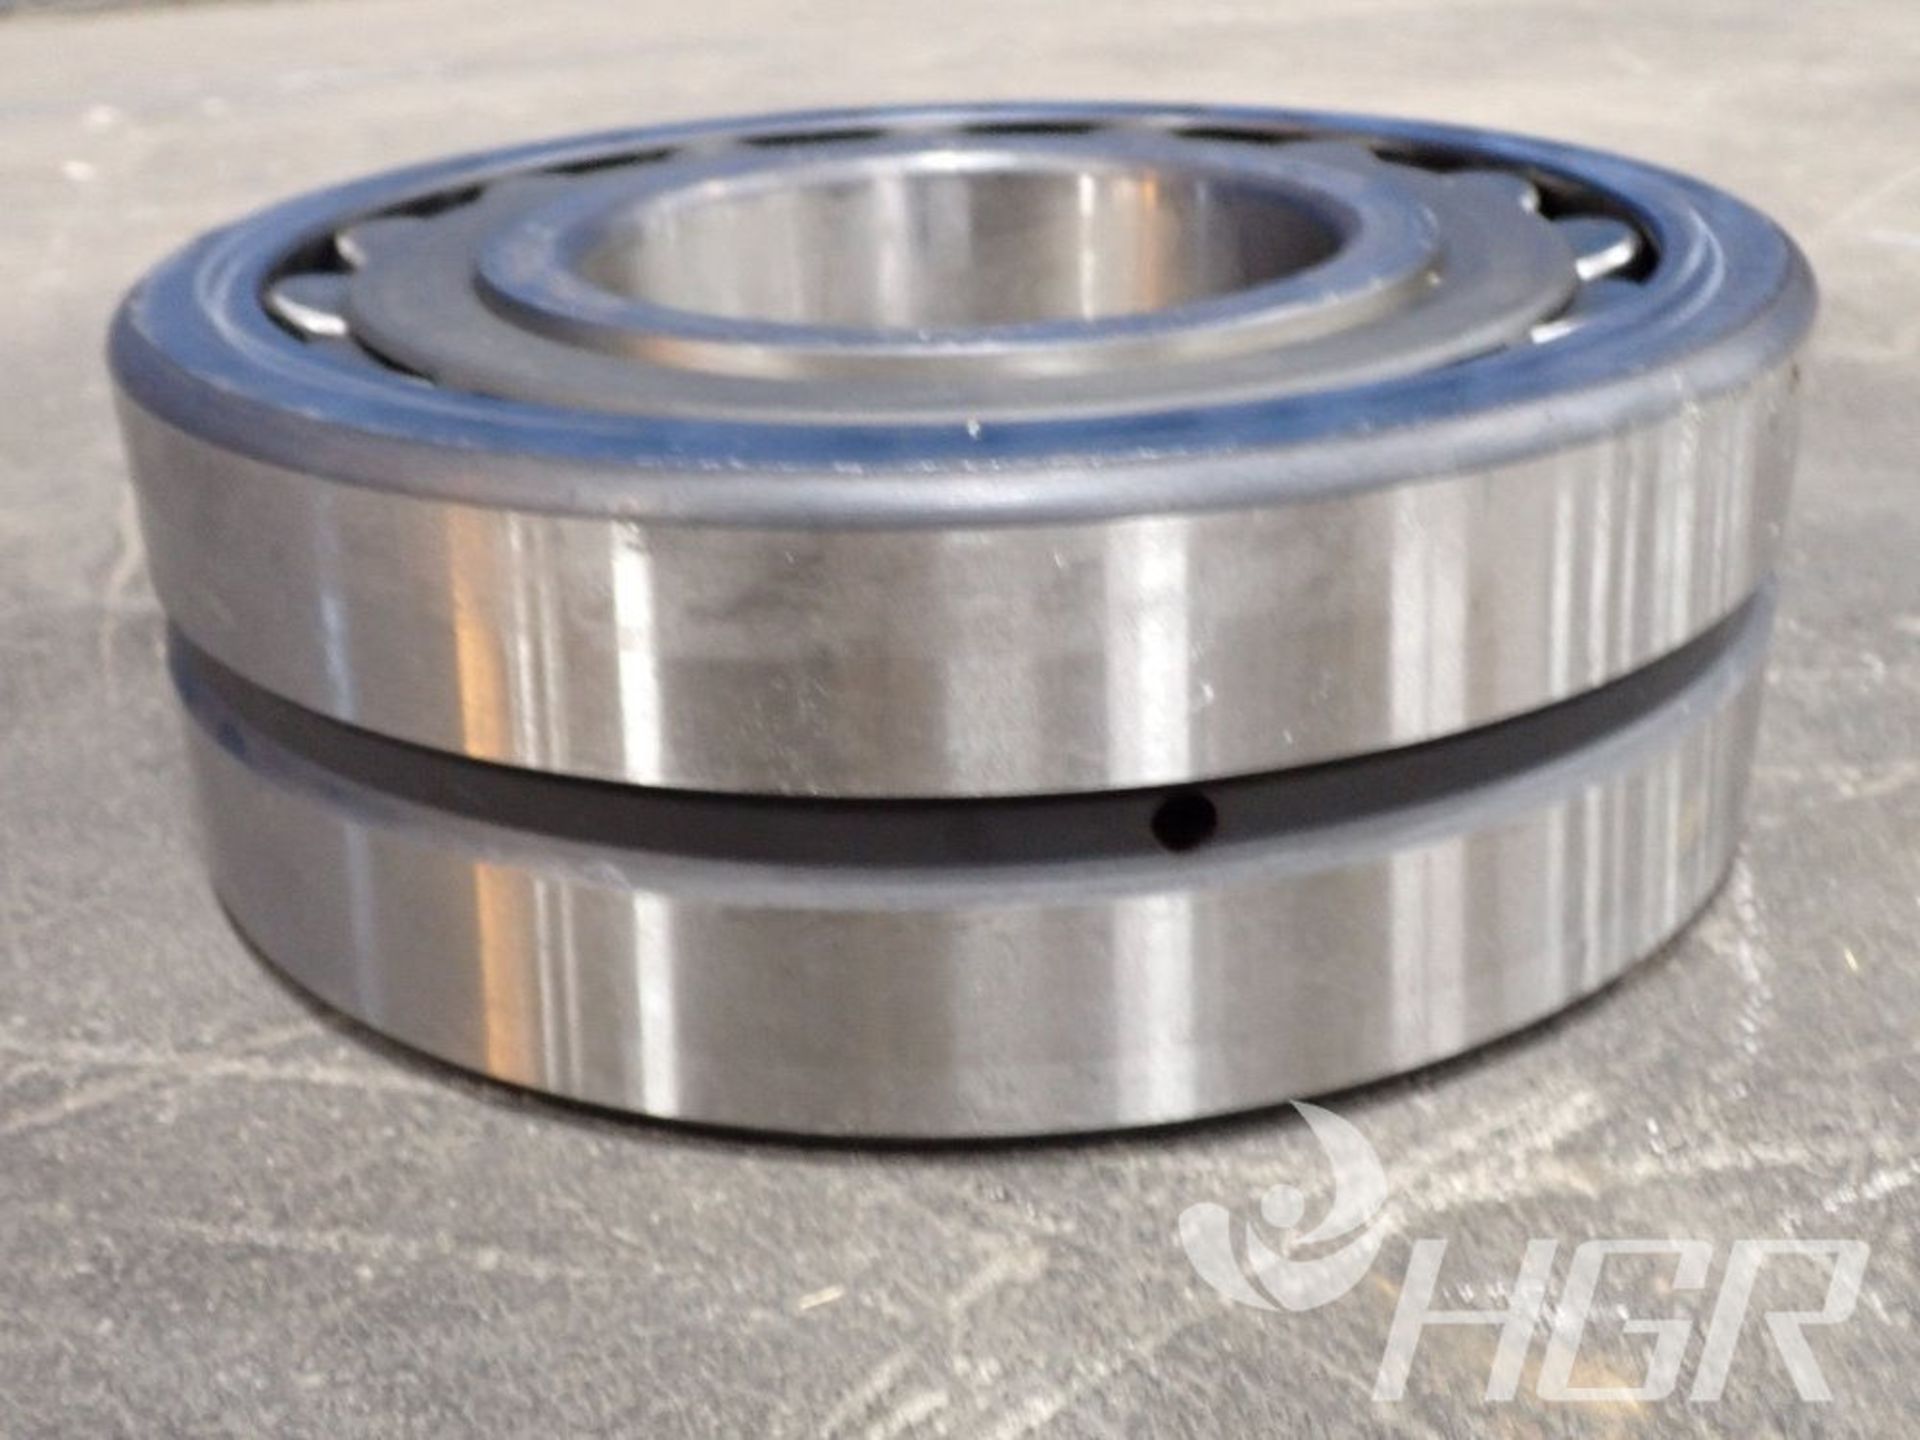 SKF BEARING, Model 22328 CC/W33, Date: n/a; s/n n/a, Approx. Capacity: 5", Power: n/a, Details: - Image 6 of 6